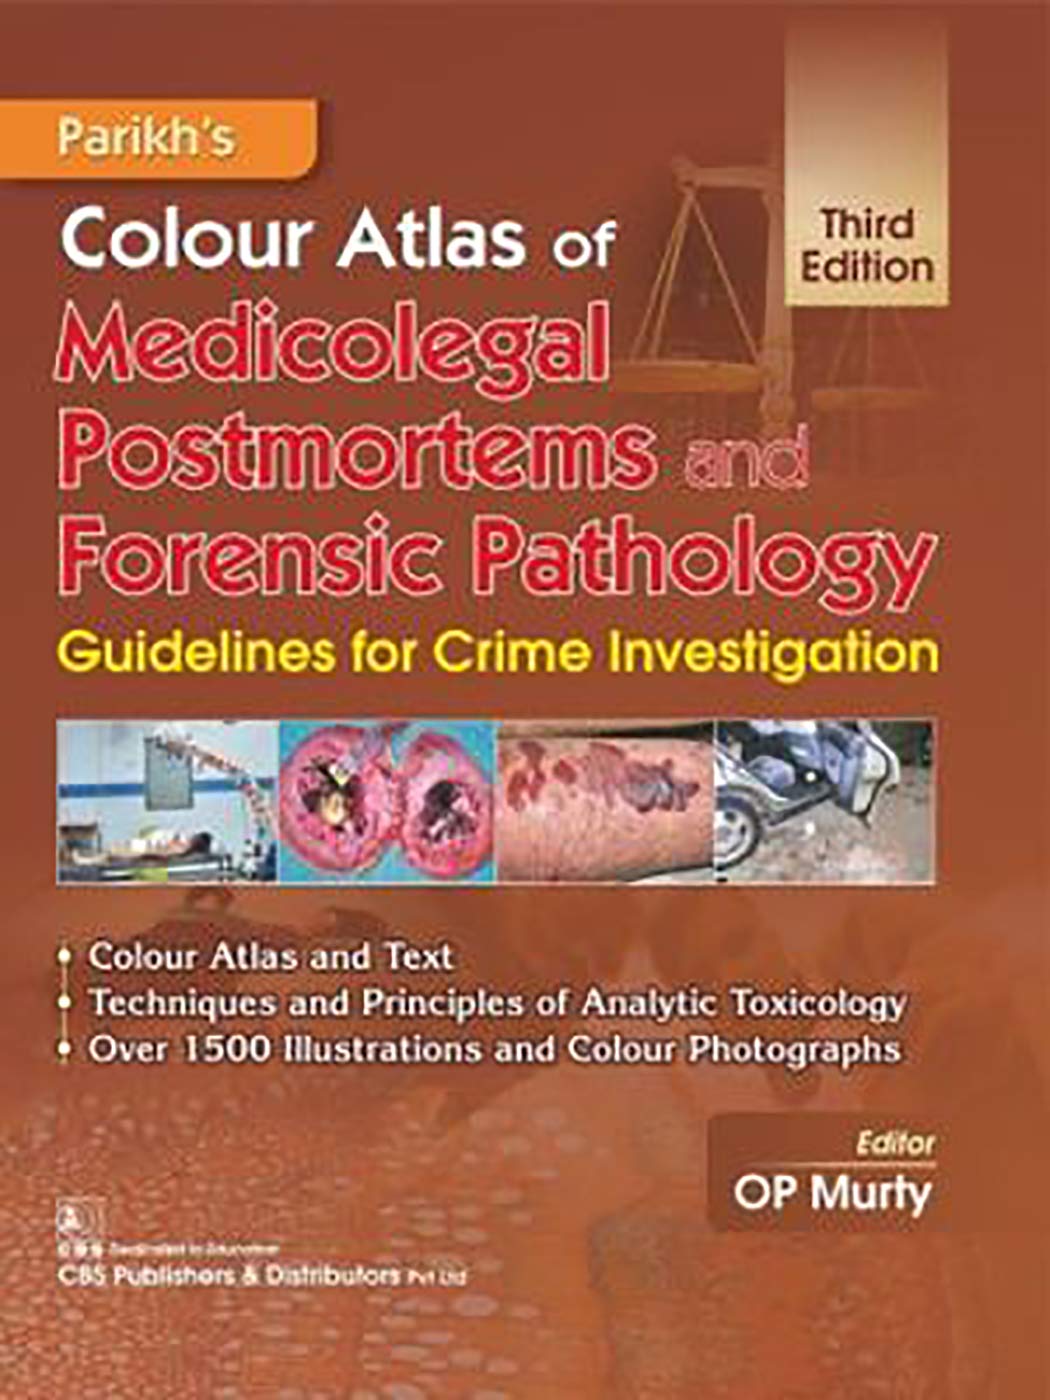 Parikh'S Colour Atlas Of Medicolegal Postmortems And Forensic Pathology: Guidelines For Crime Investigation, 3E (Hb)